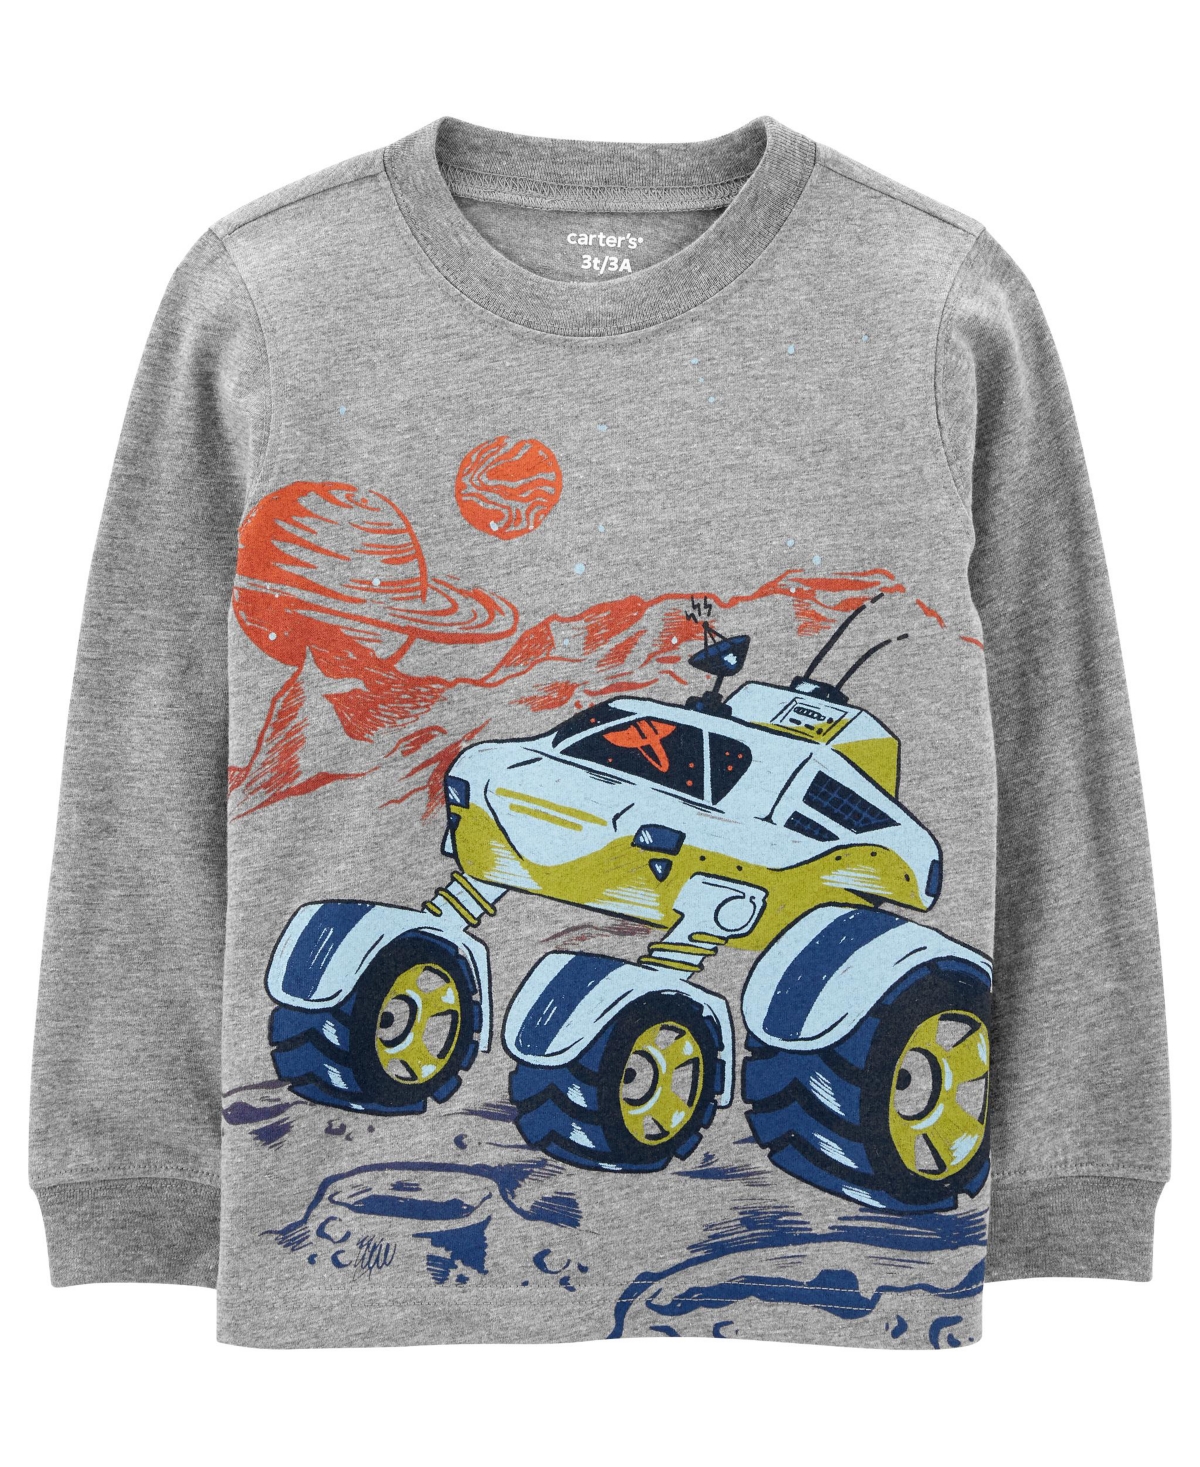 Carter's Toddler Boys Long Sleeved Graphic Jersey Shirt In Gray